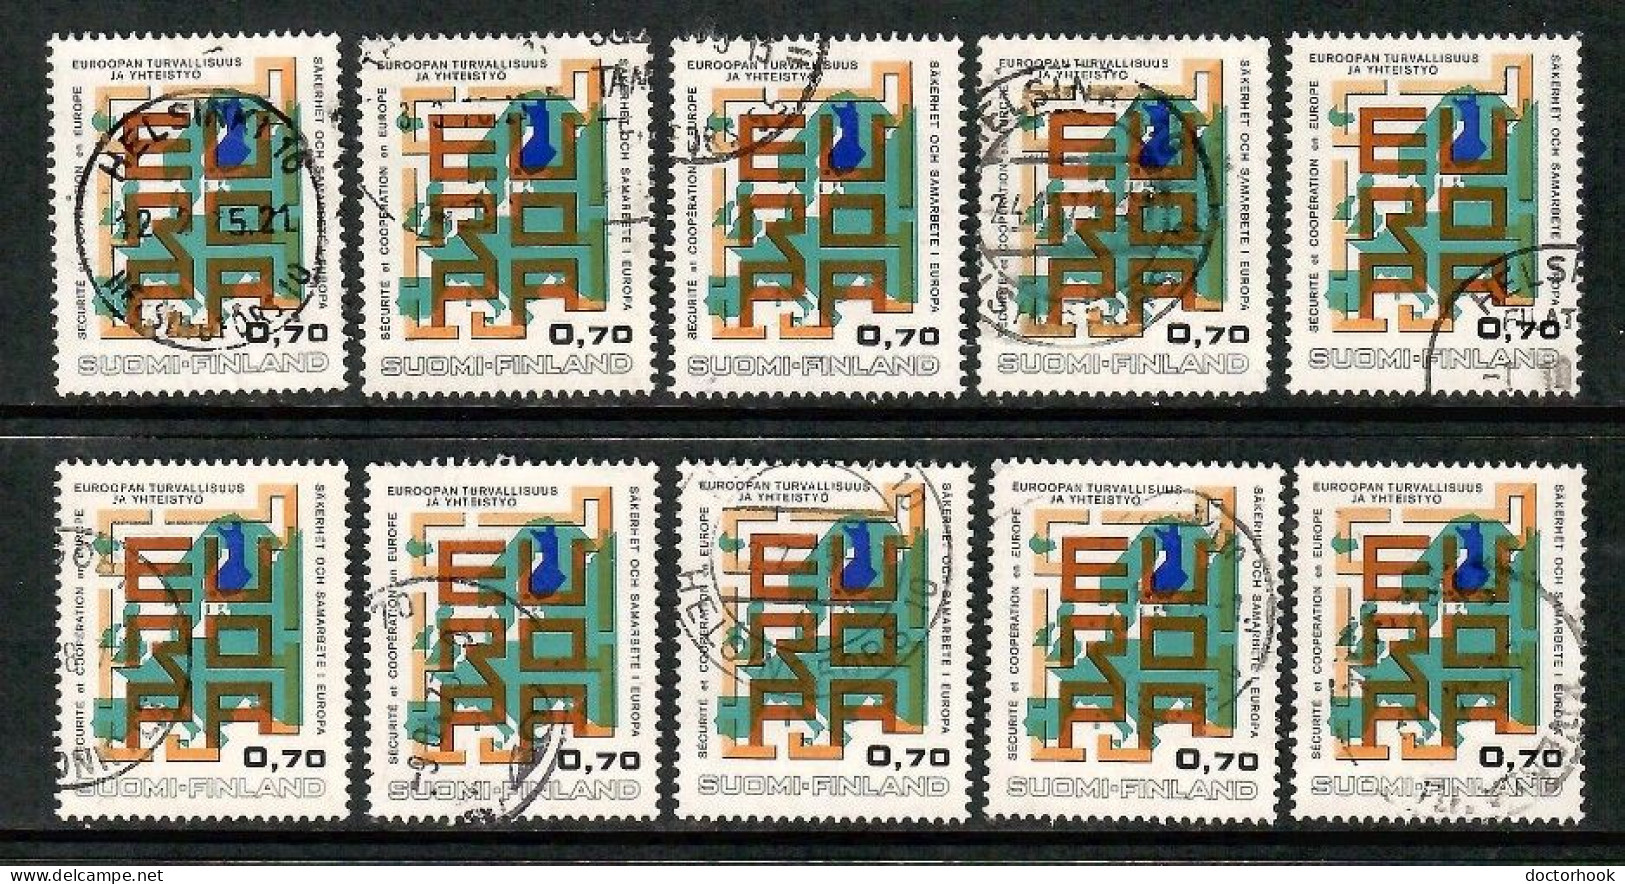 FINLAND   Scott # 529 USED WHOLESALE LOT OF 10 (CONDITION AS PER SCAN) (WH-620) - Sammlungen